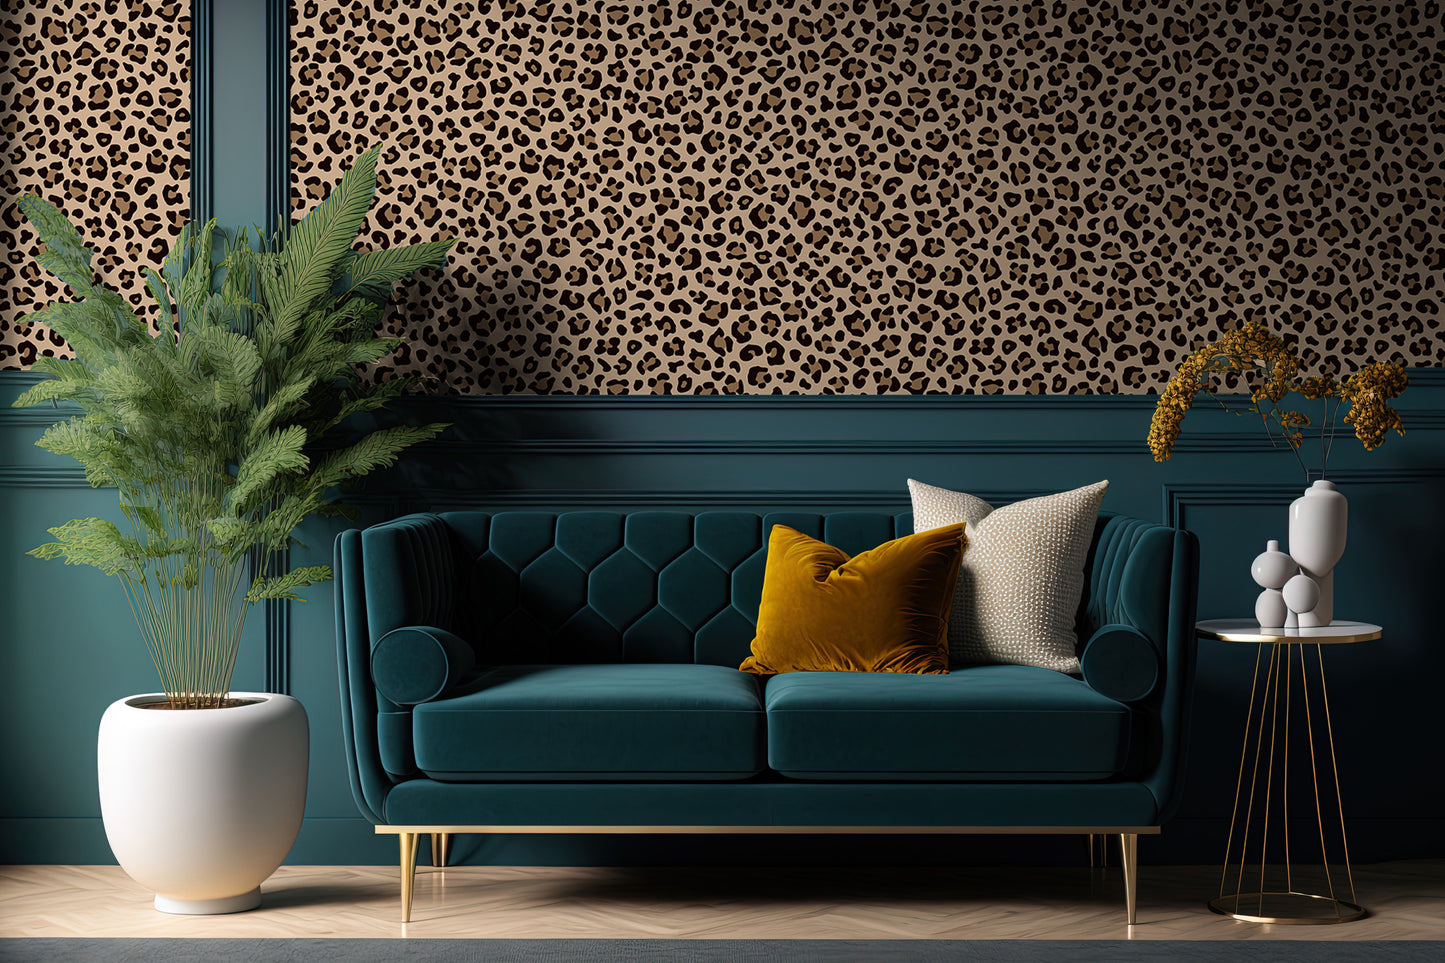 Leopard Print Removable Peel And Stick Wallpaper